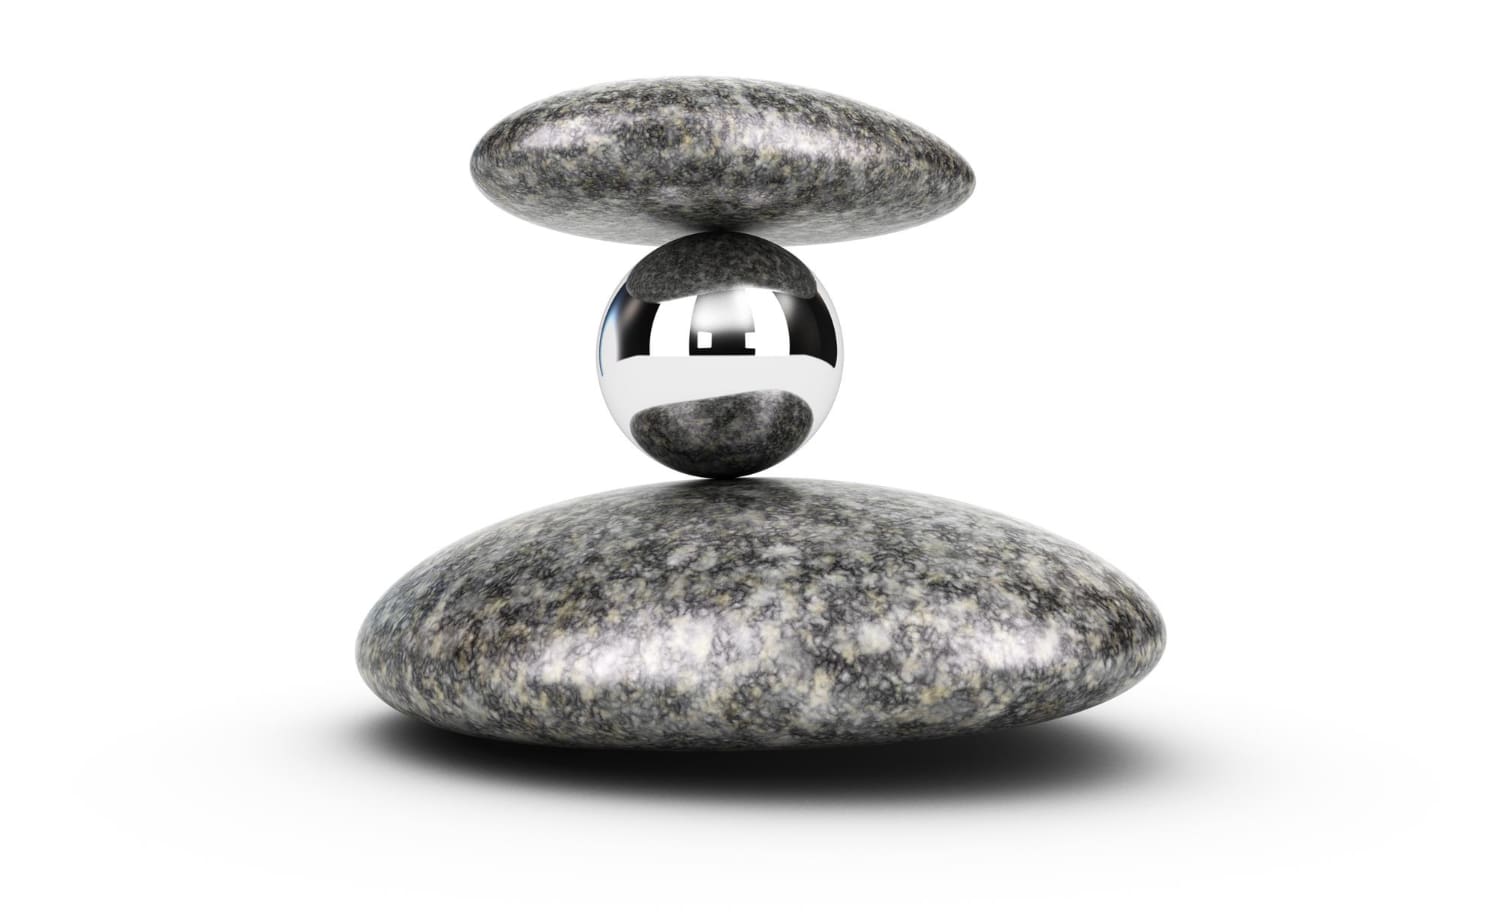 3d illustration two pebbles metal sphere stacked white background concept challenge self control 1